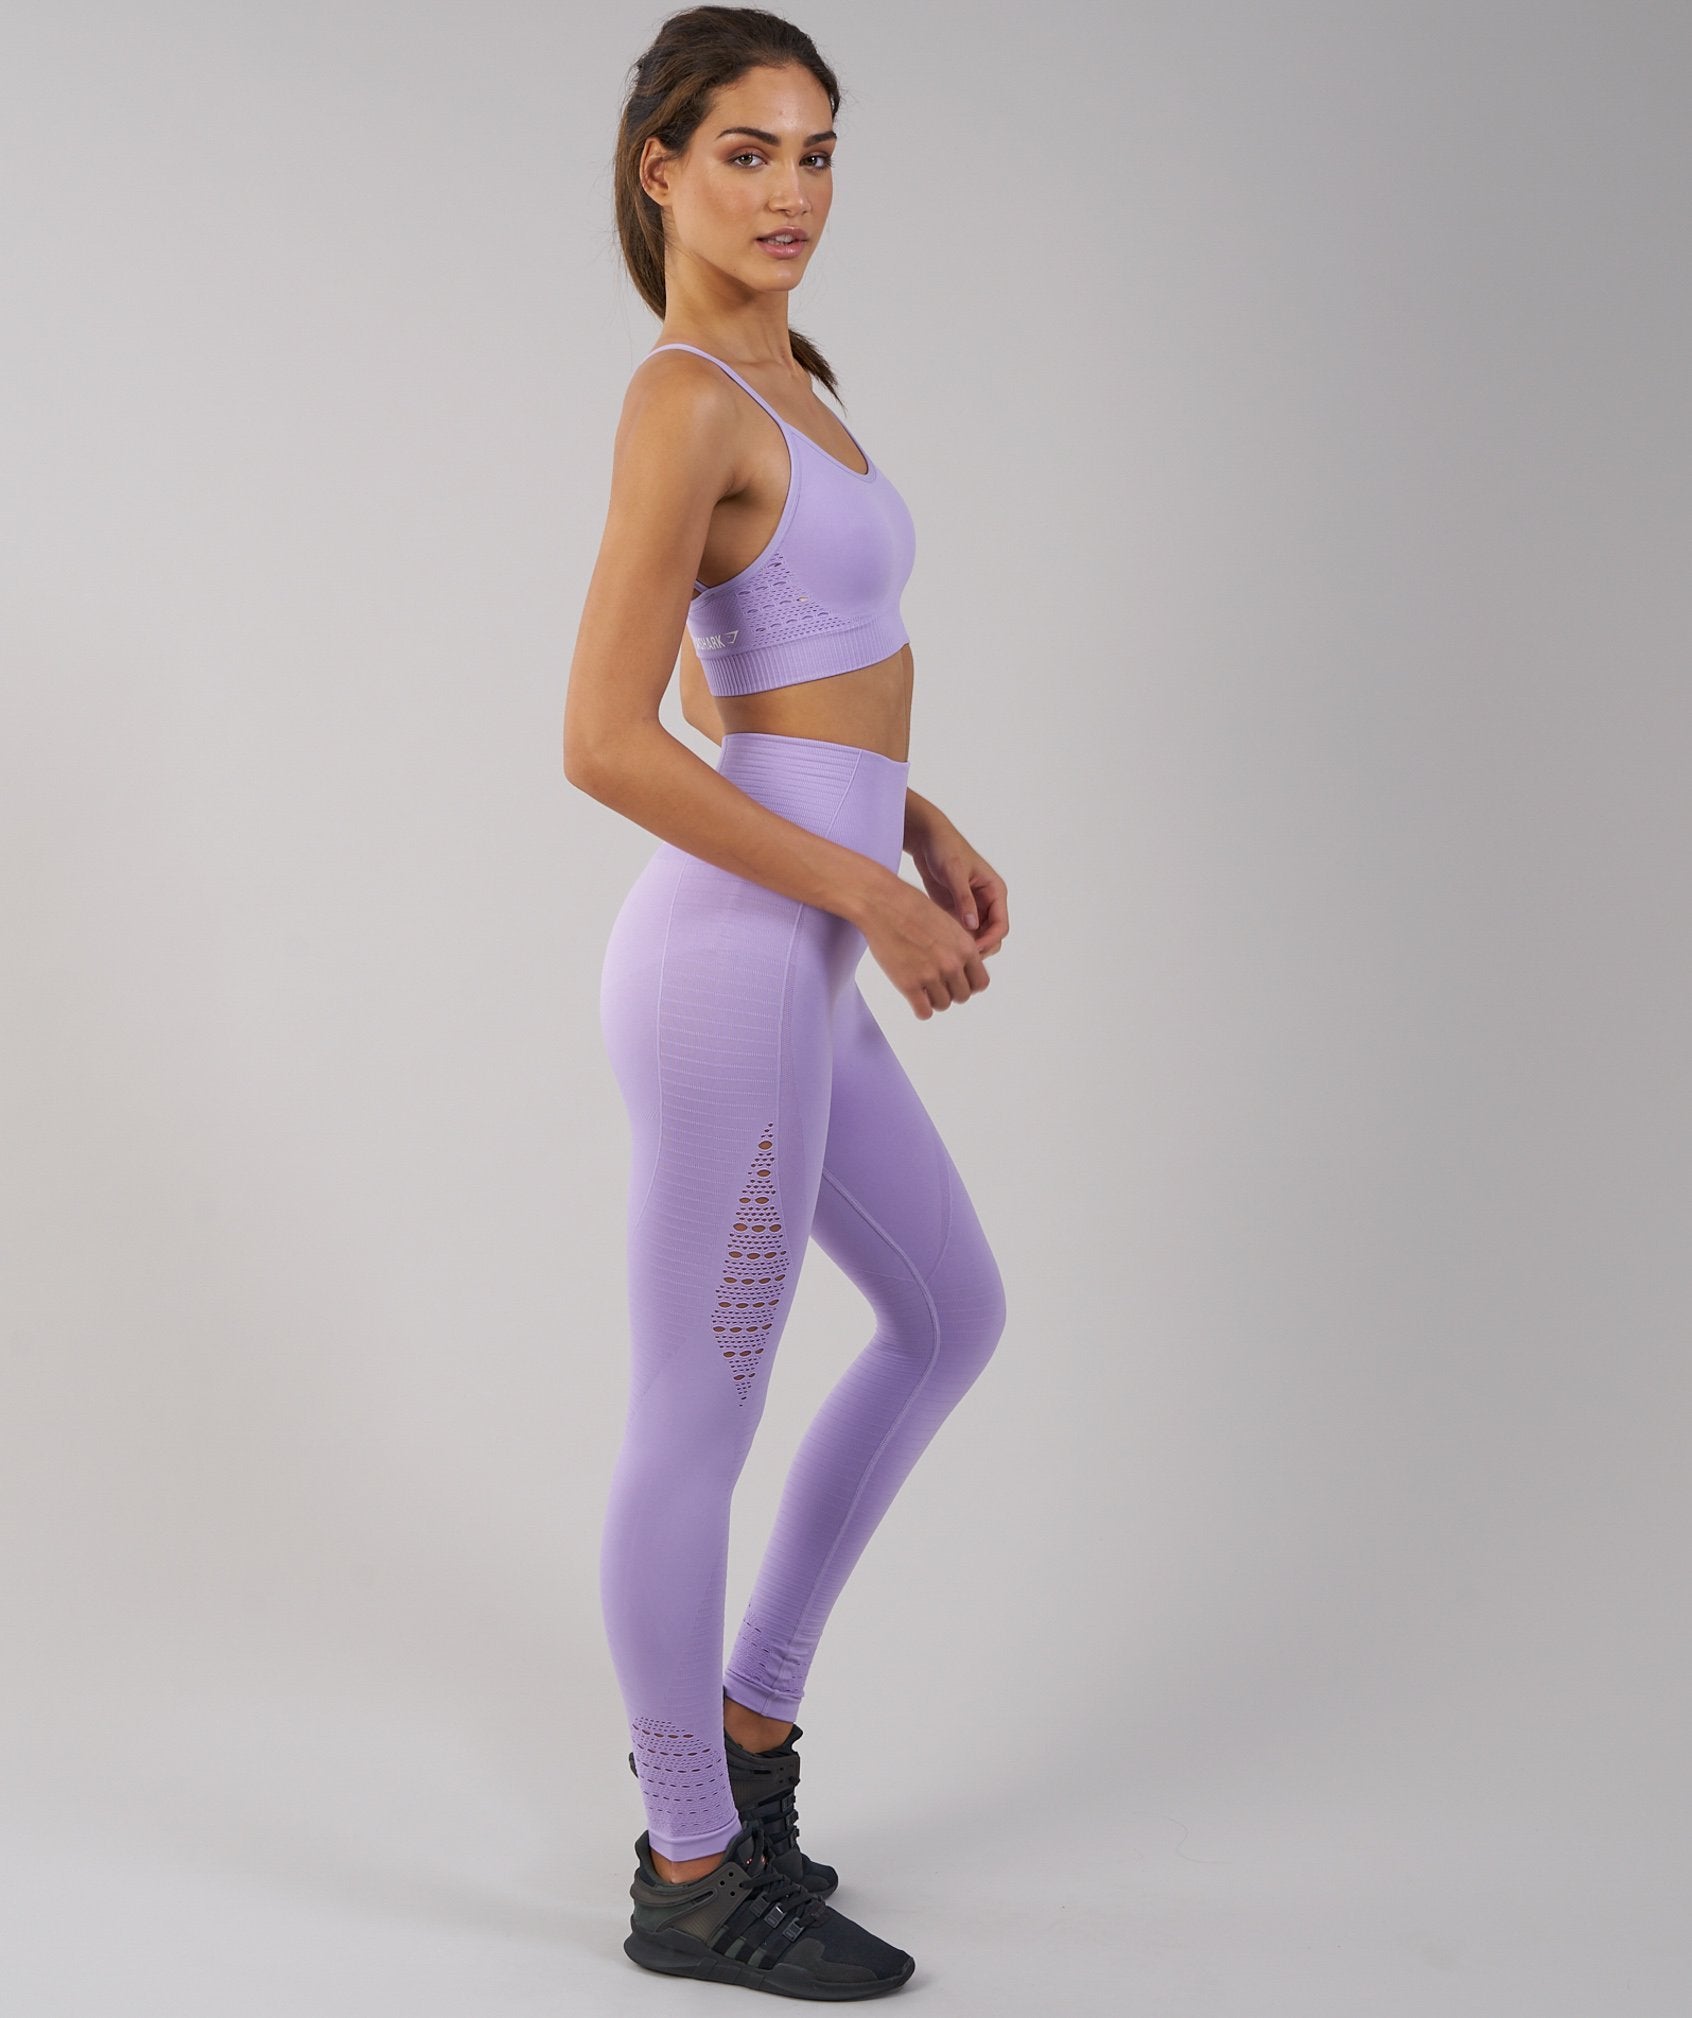 Energy Seamless Sports Bra in Pastel Lilac - view 4